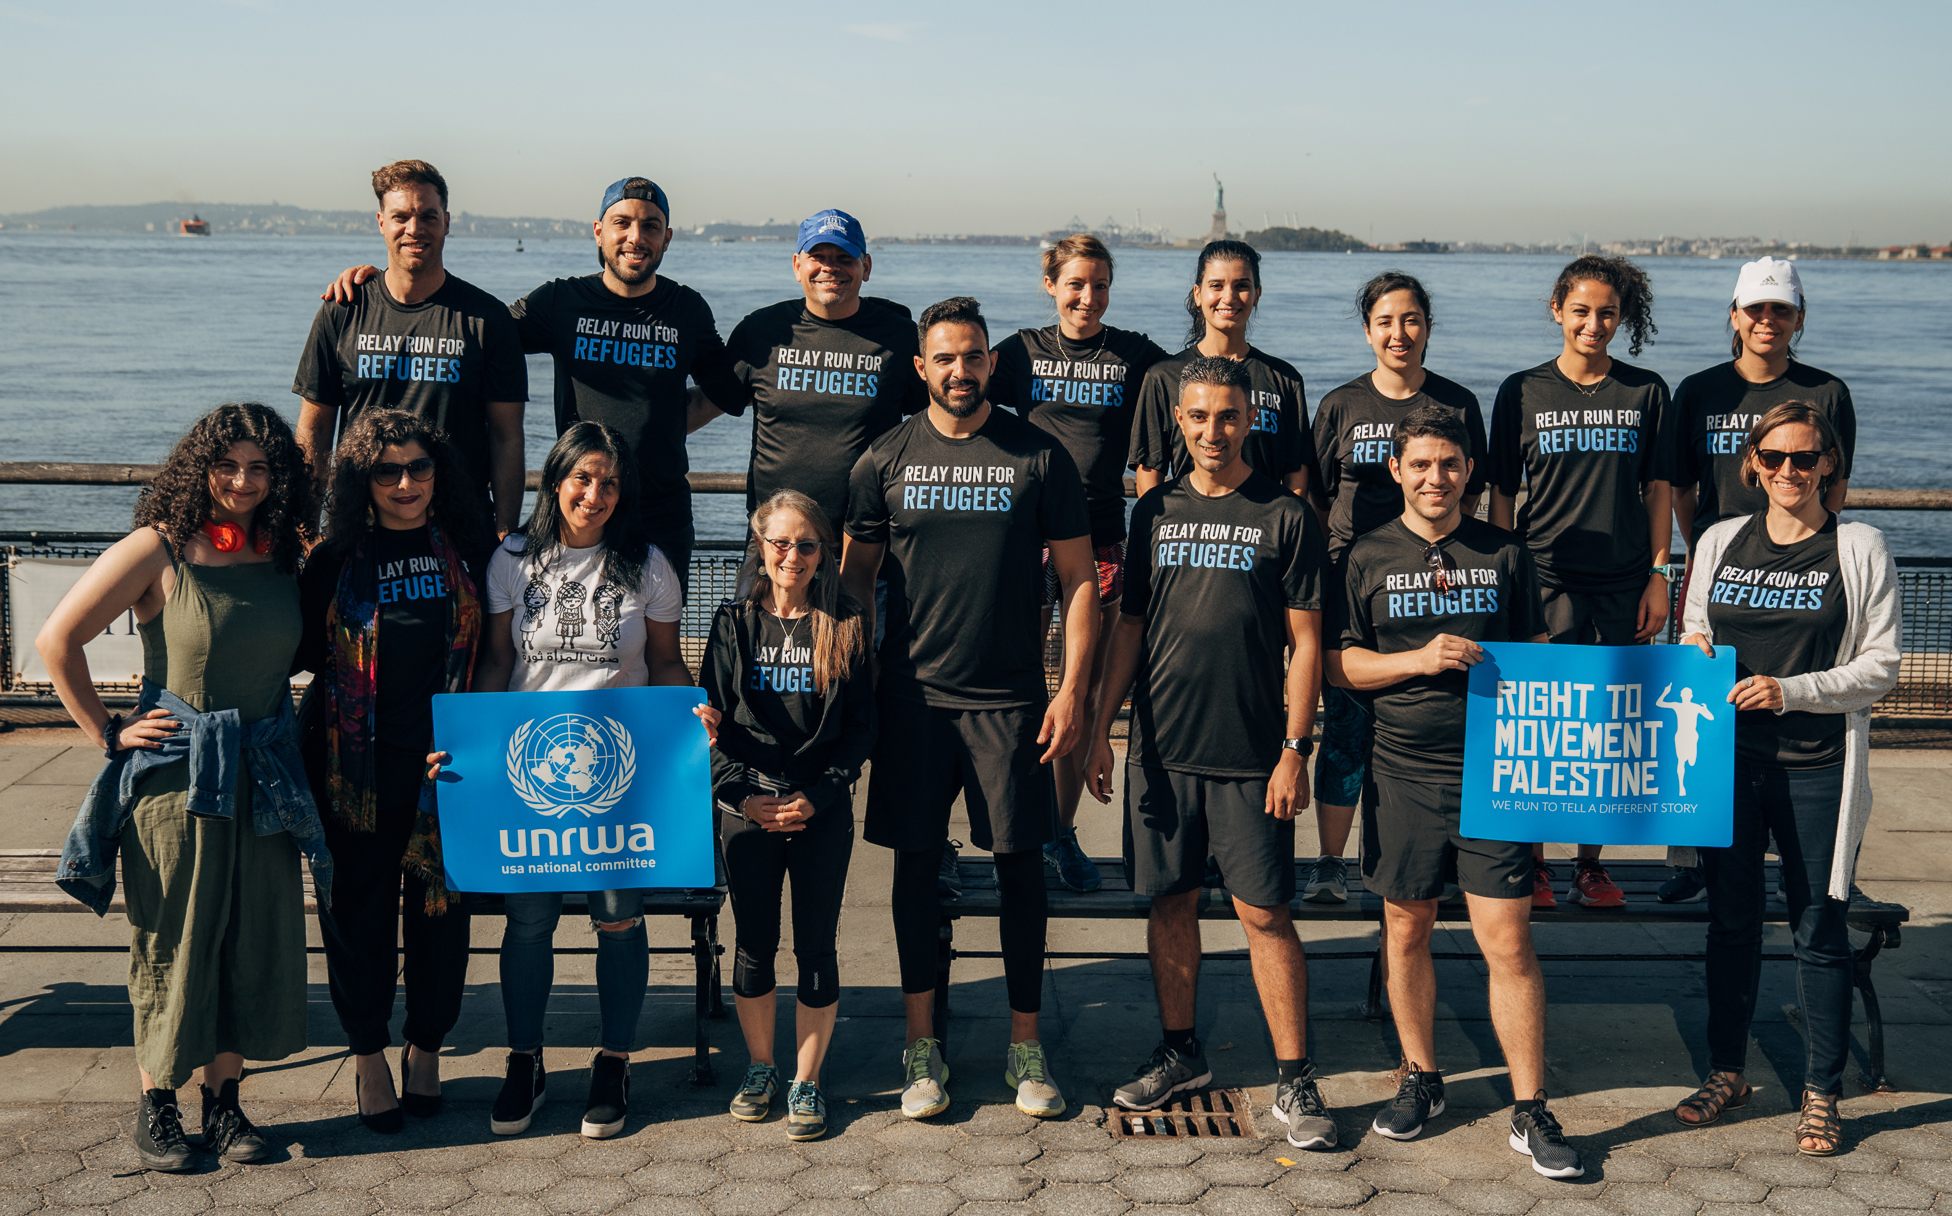 UNRWA Relay Run for Refugees with Right to Movement Palestine